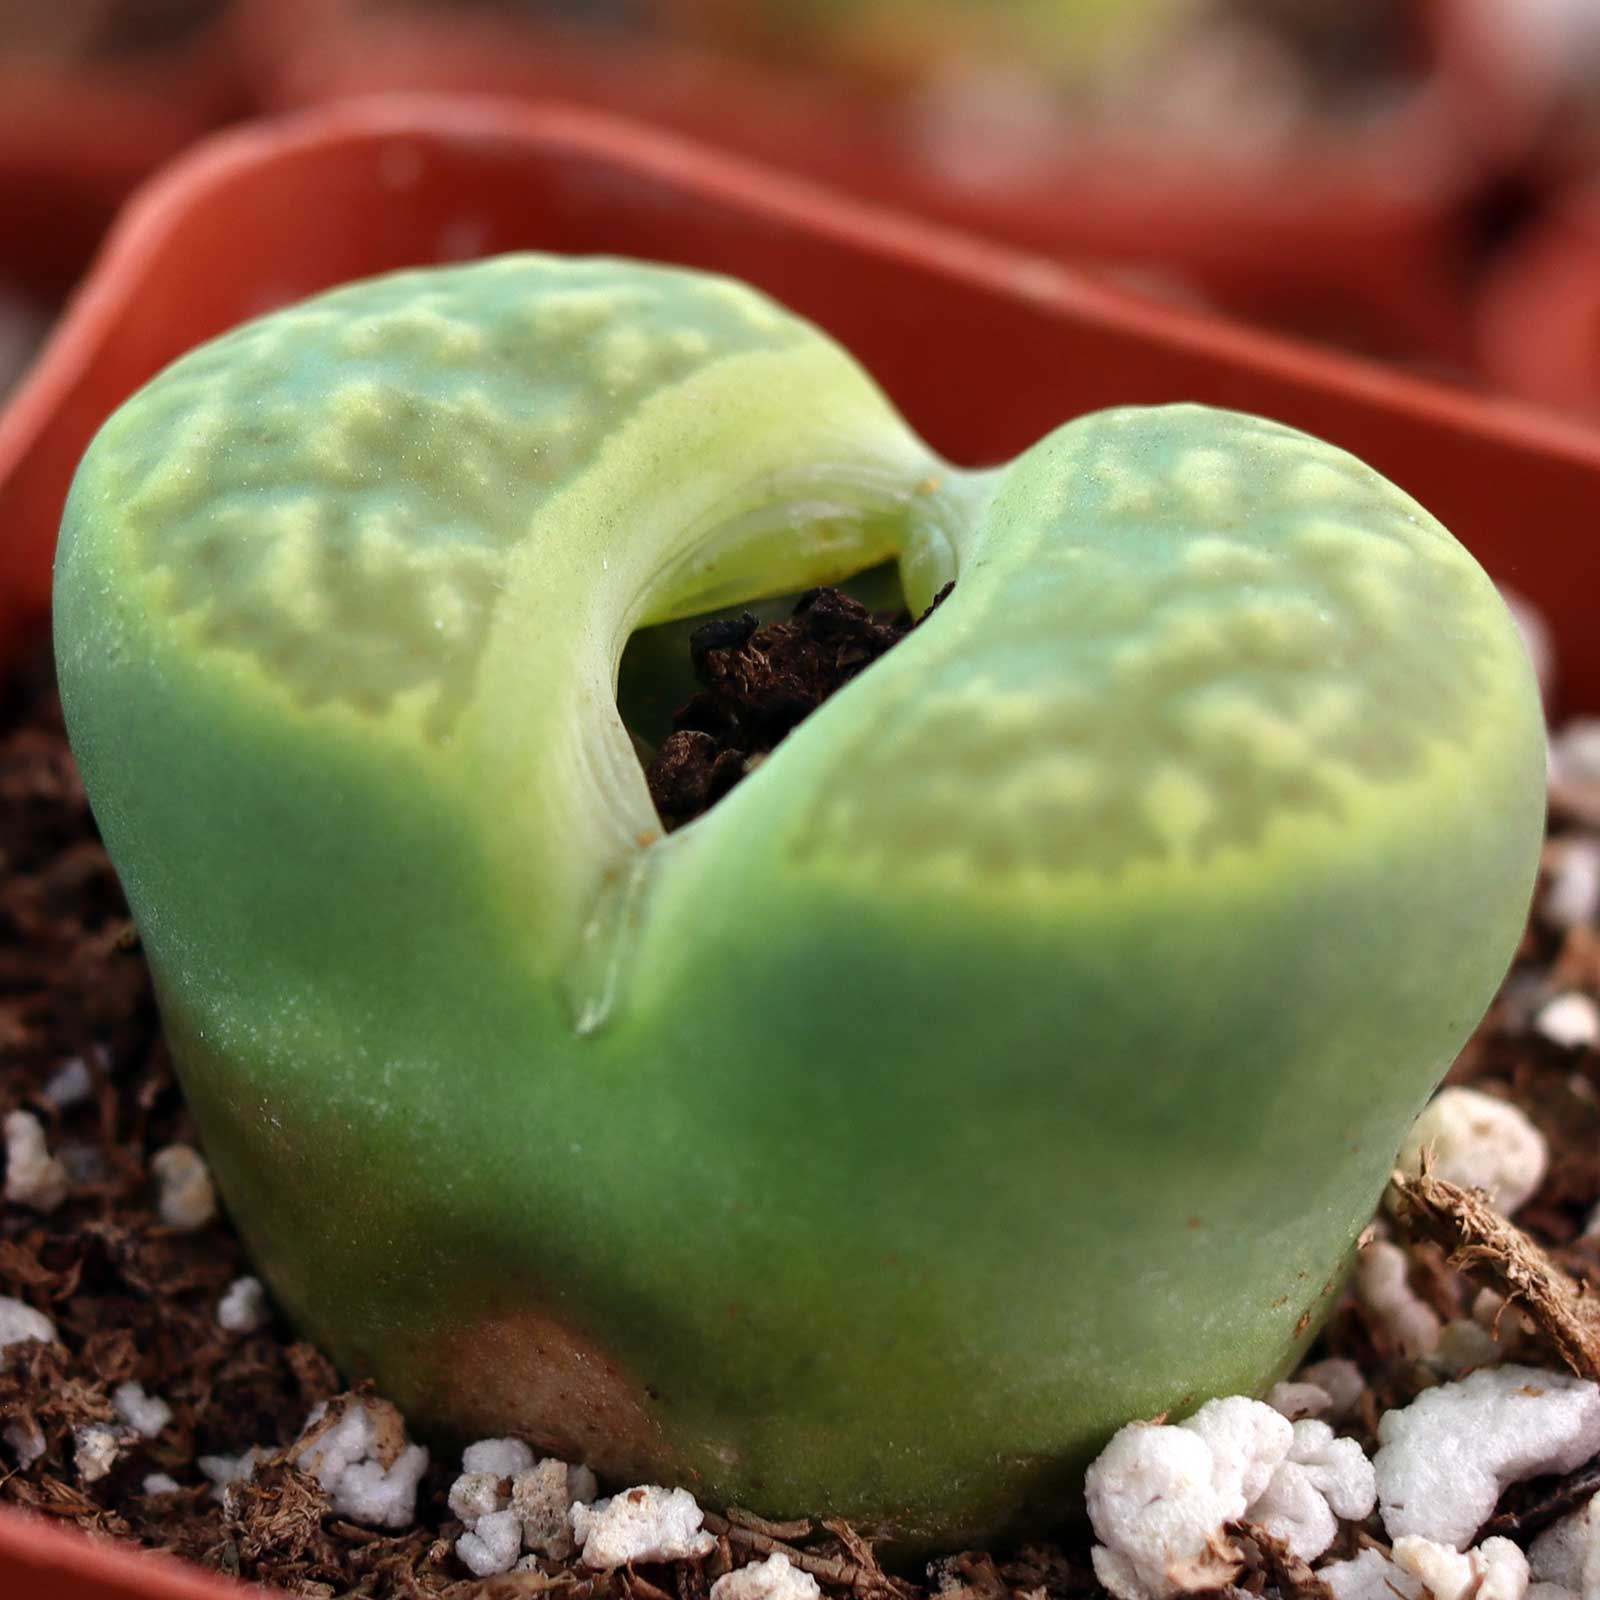 Why is it necessary to plant only one lithops per pot?